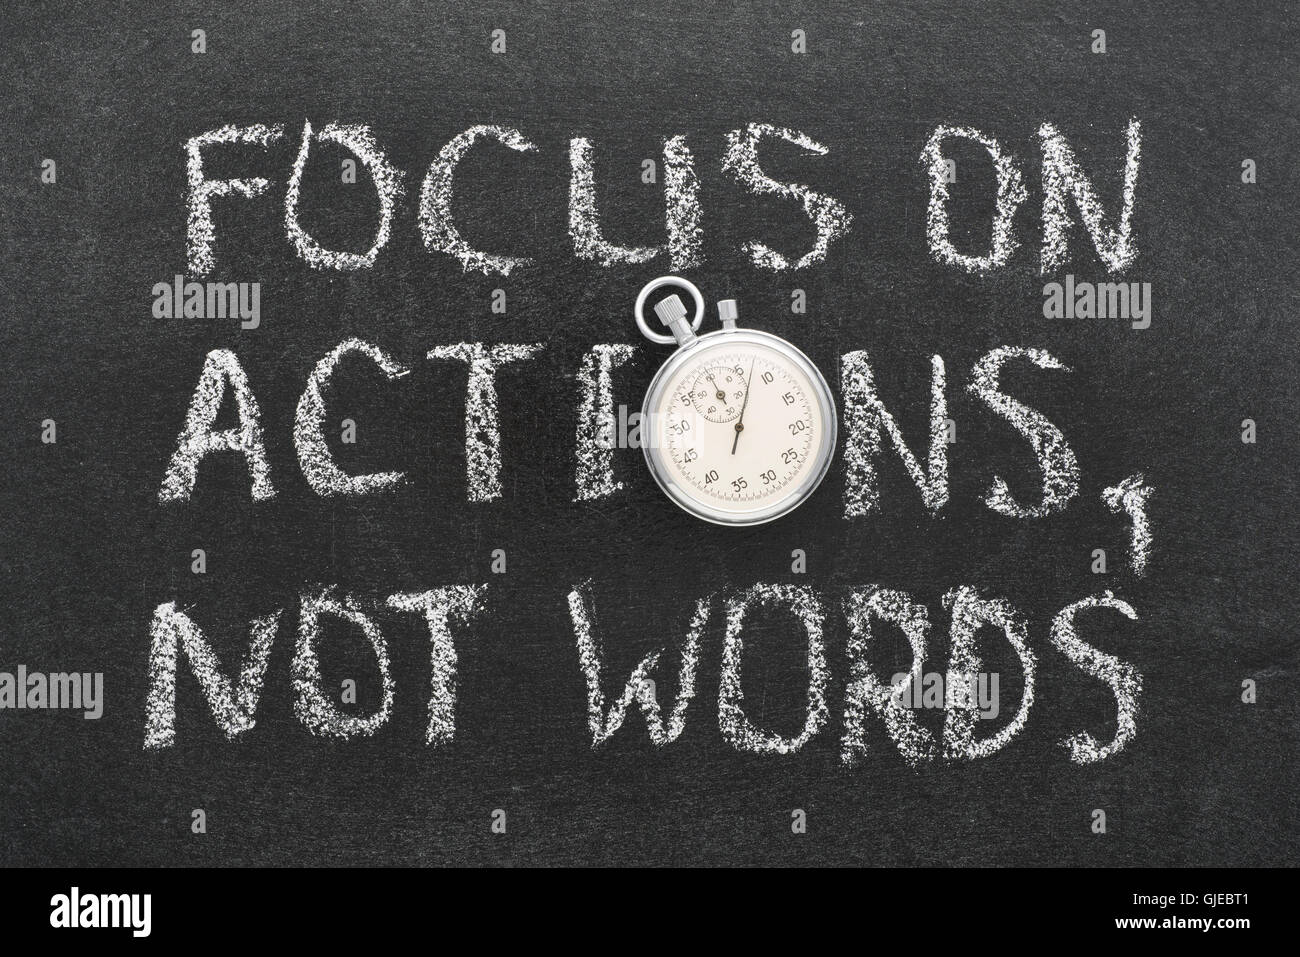 focus on actions, not words phrase handwritten on chalkboard with vintage precise stopwatch used instead of O Stock Photo